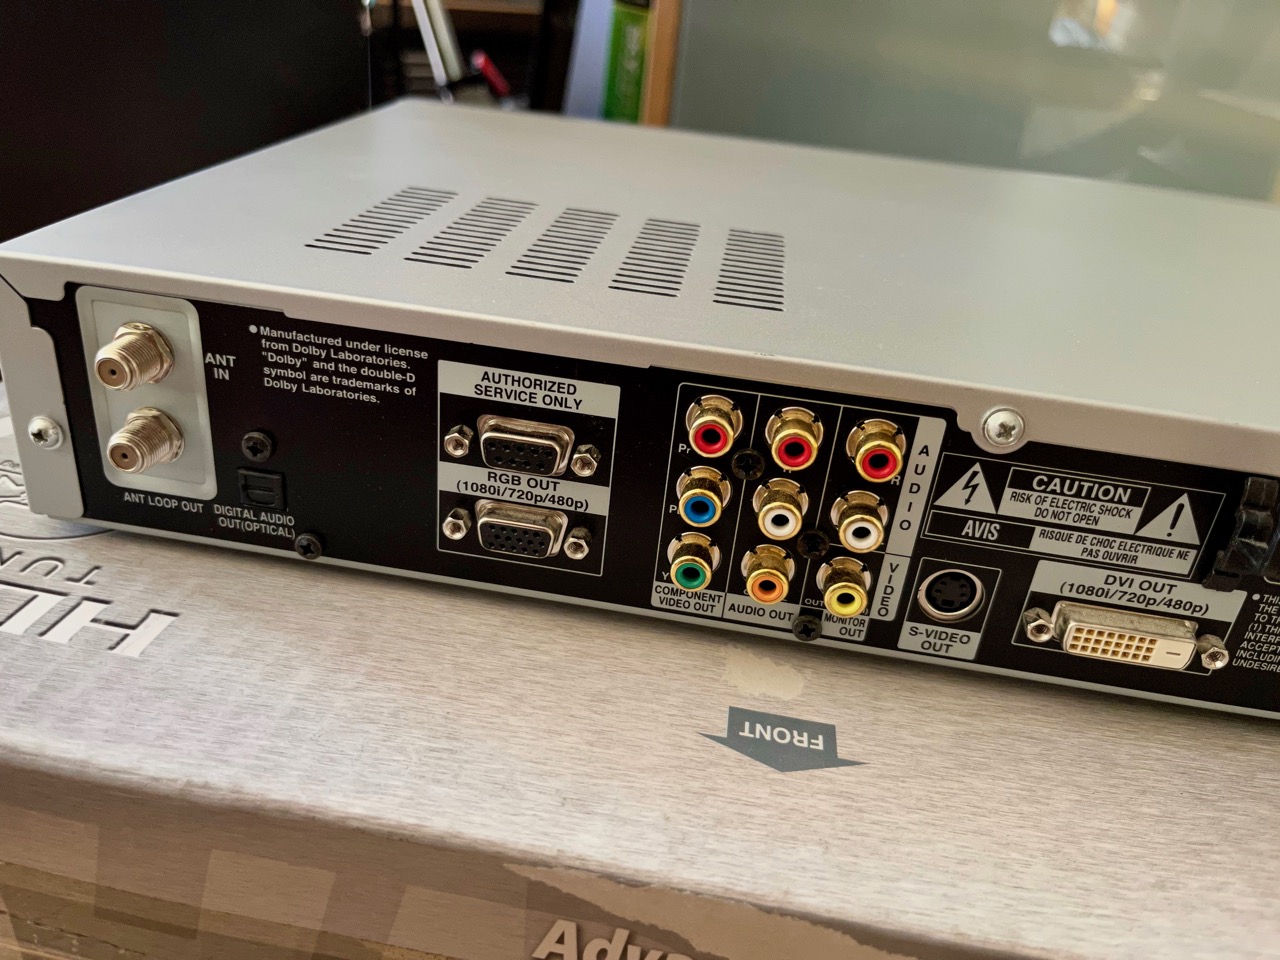 LG LST-4200A HD Receiver